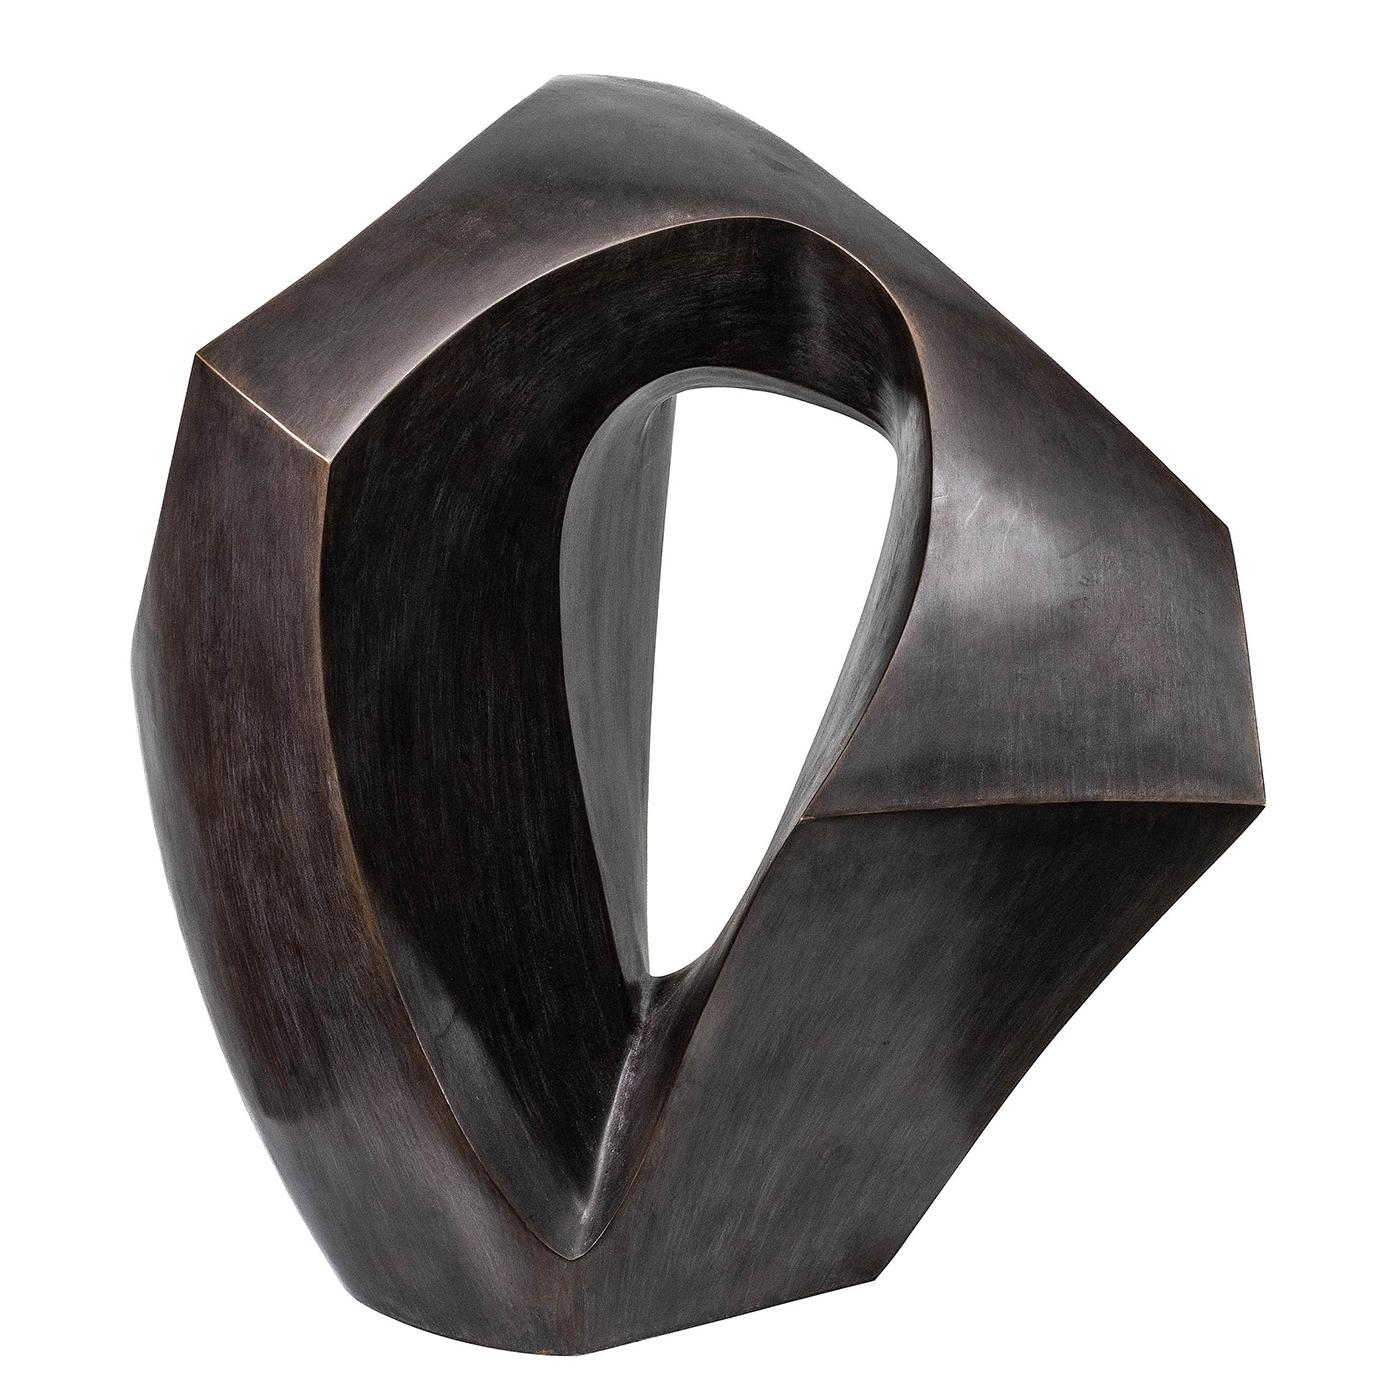 Sculpture loyalty bronze with all structure 
in solid bronze in brown finish.